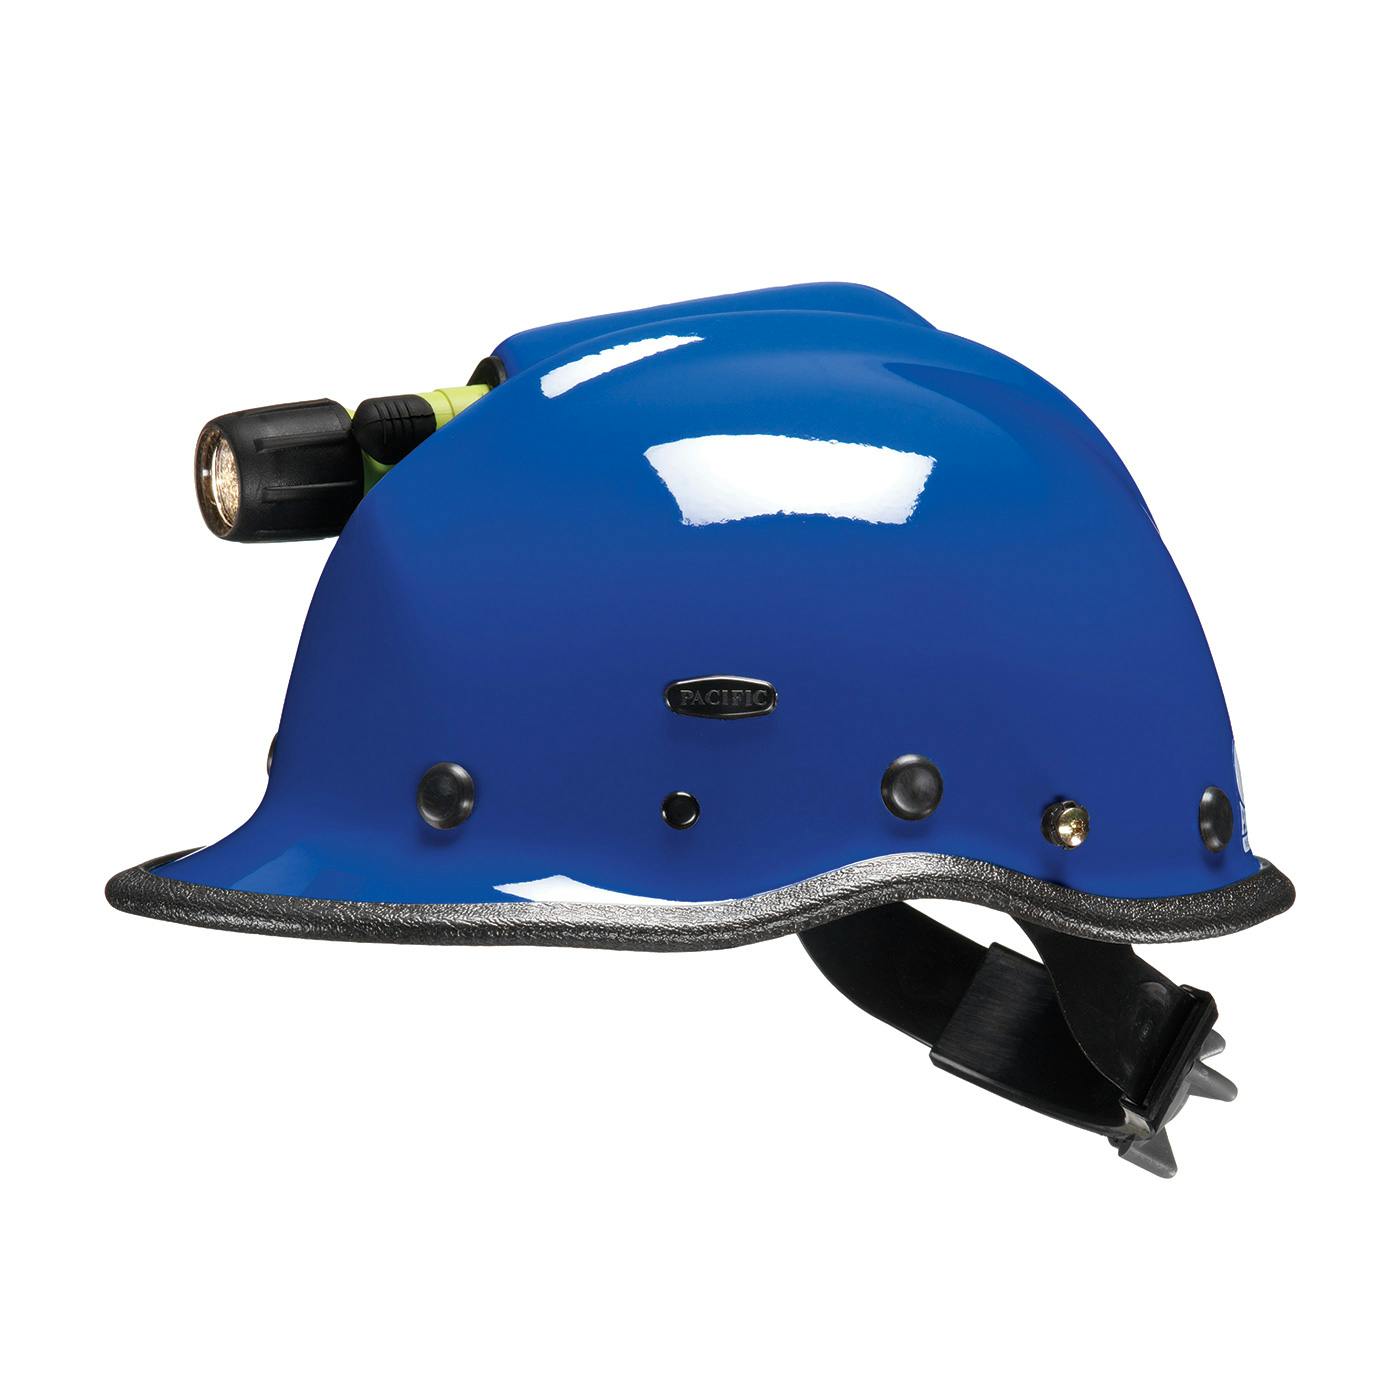 R5T™ Rescue Helmet with ESS Goggle Mounts and Built-in Light Holder (860-60XX)